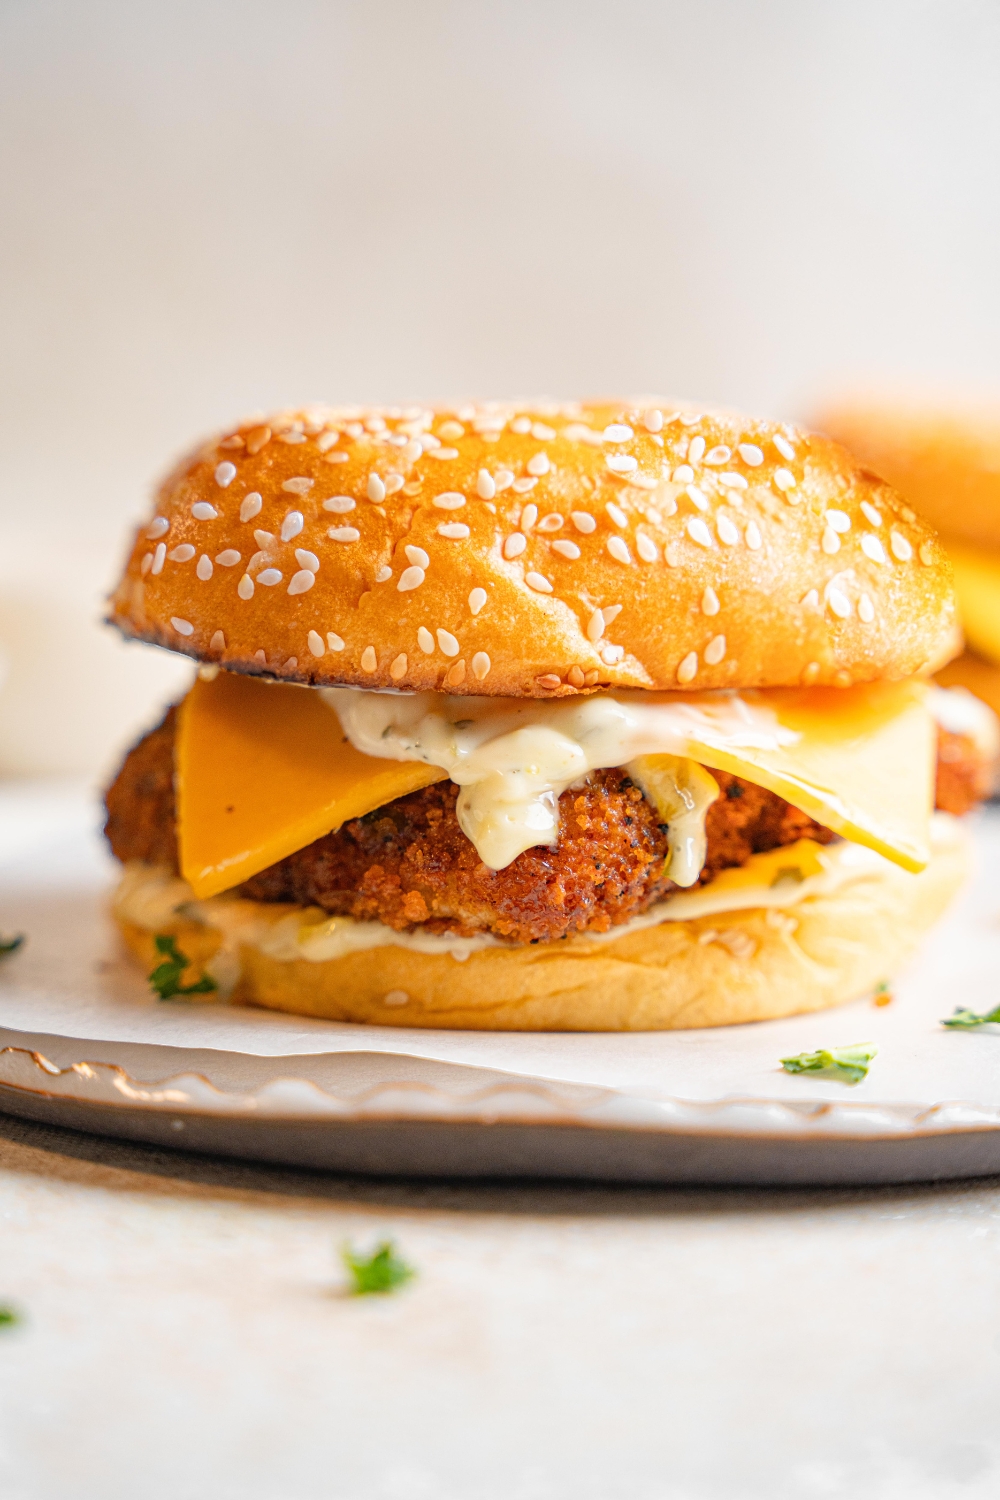 A filet o fish sandwich sits on a white plate. Garlic aioli and cheddar cheese can be seen between the buns.